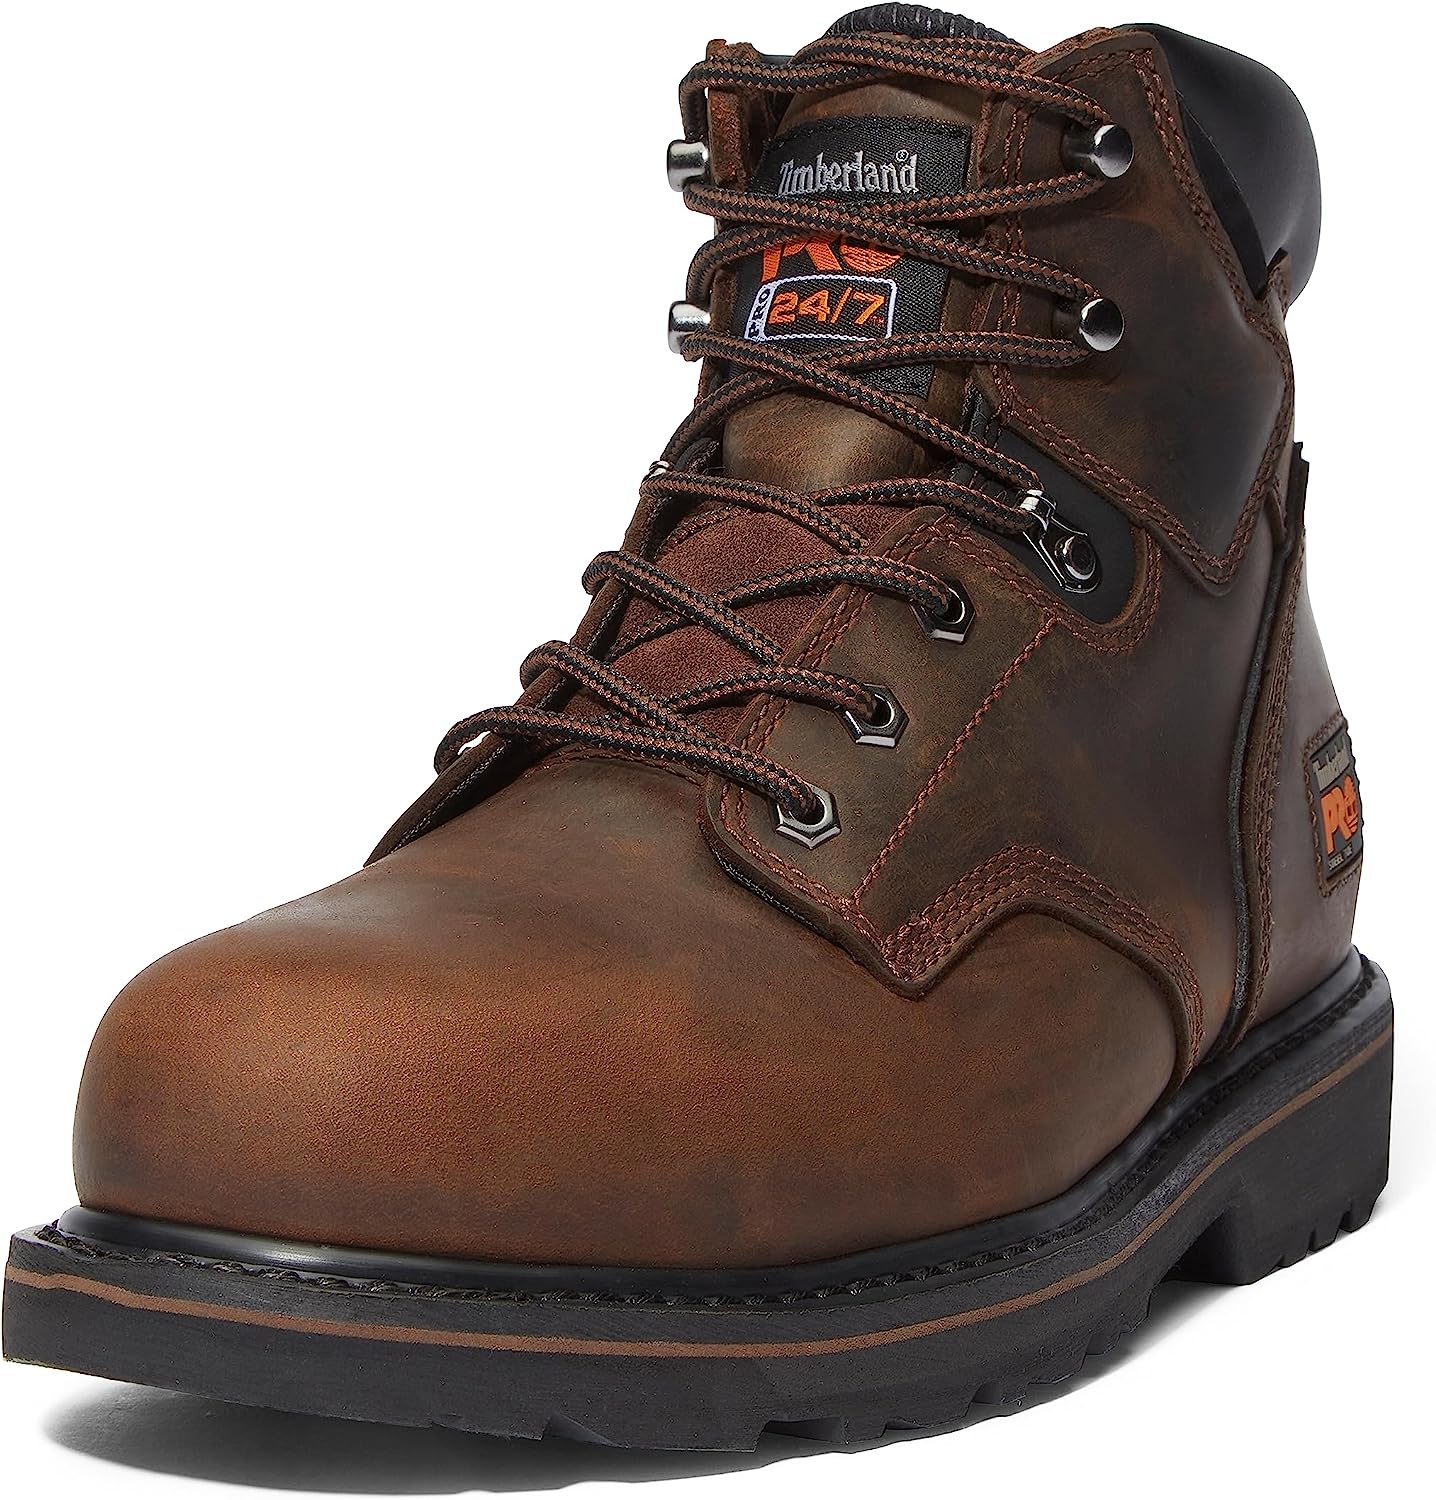 Timberland Men's Pit Boss 6 Inch Steel Safety Toe [...]